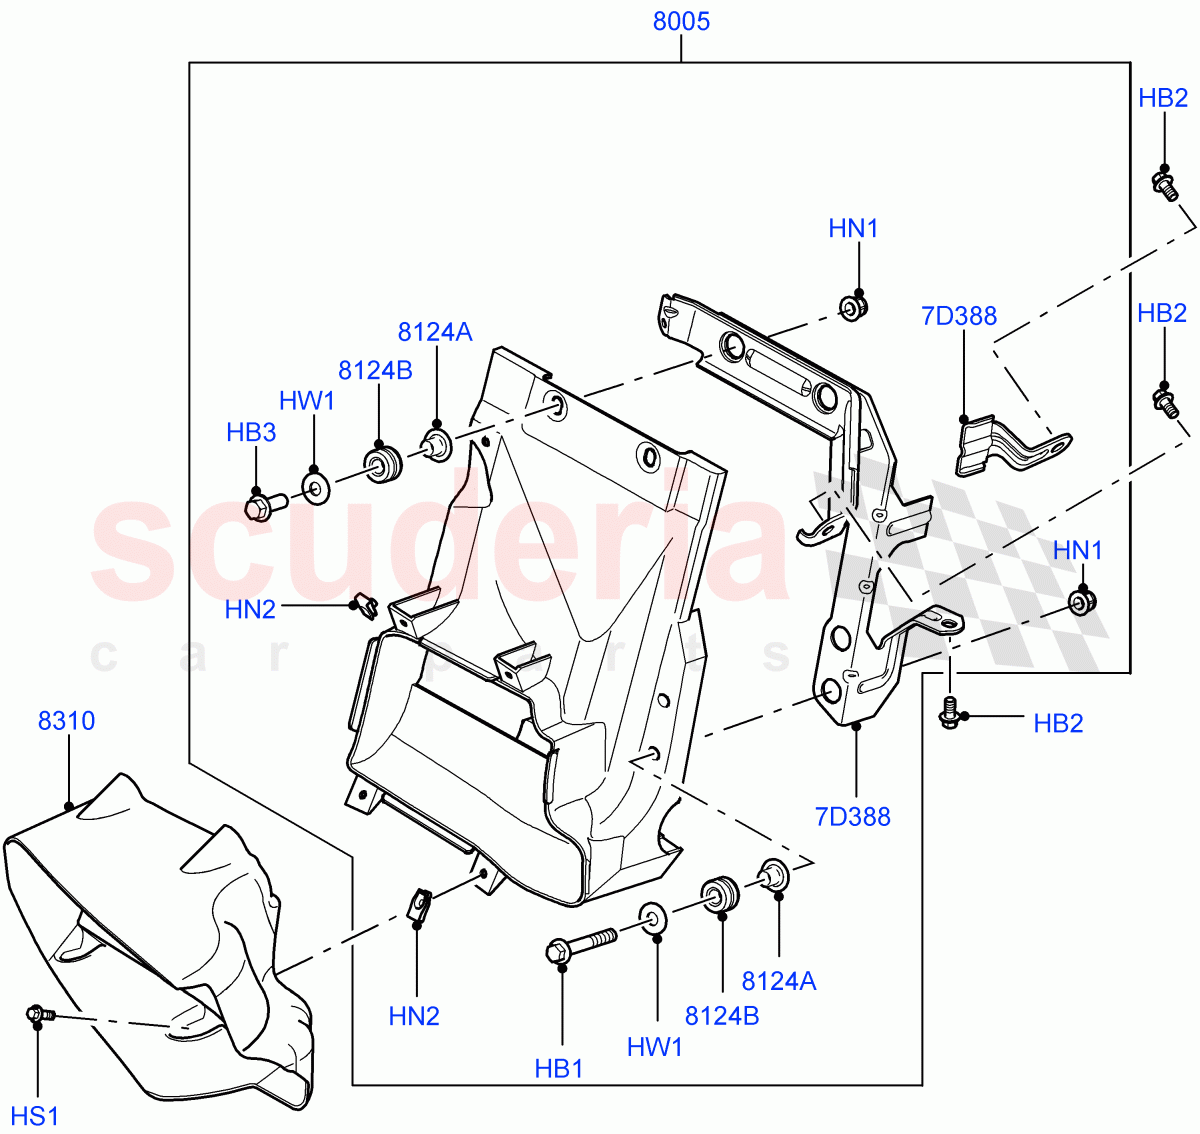 Radiator/Coolant Overflow Container(Cooling Ducts)(5.0L OHC SGDI NA V8 Petrol - AJ133)((V)FROMAA000001,(V)TOBA333350) of Land Rover Land Rover Range Rover (2010-2012) [5.0 OHC SGDI NA V8 Petrol]